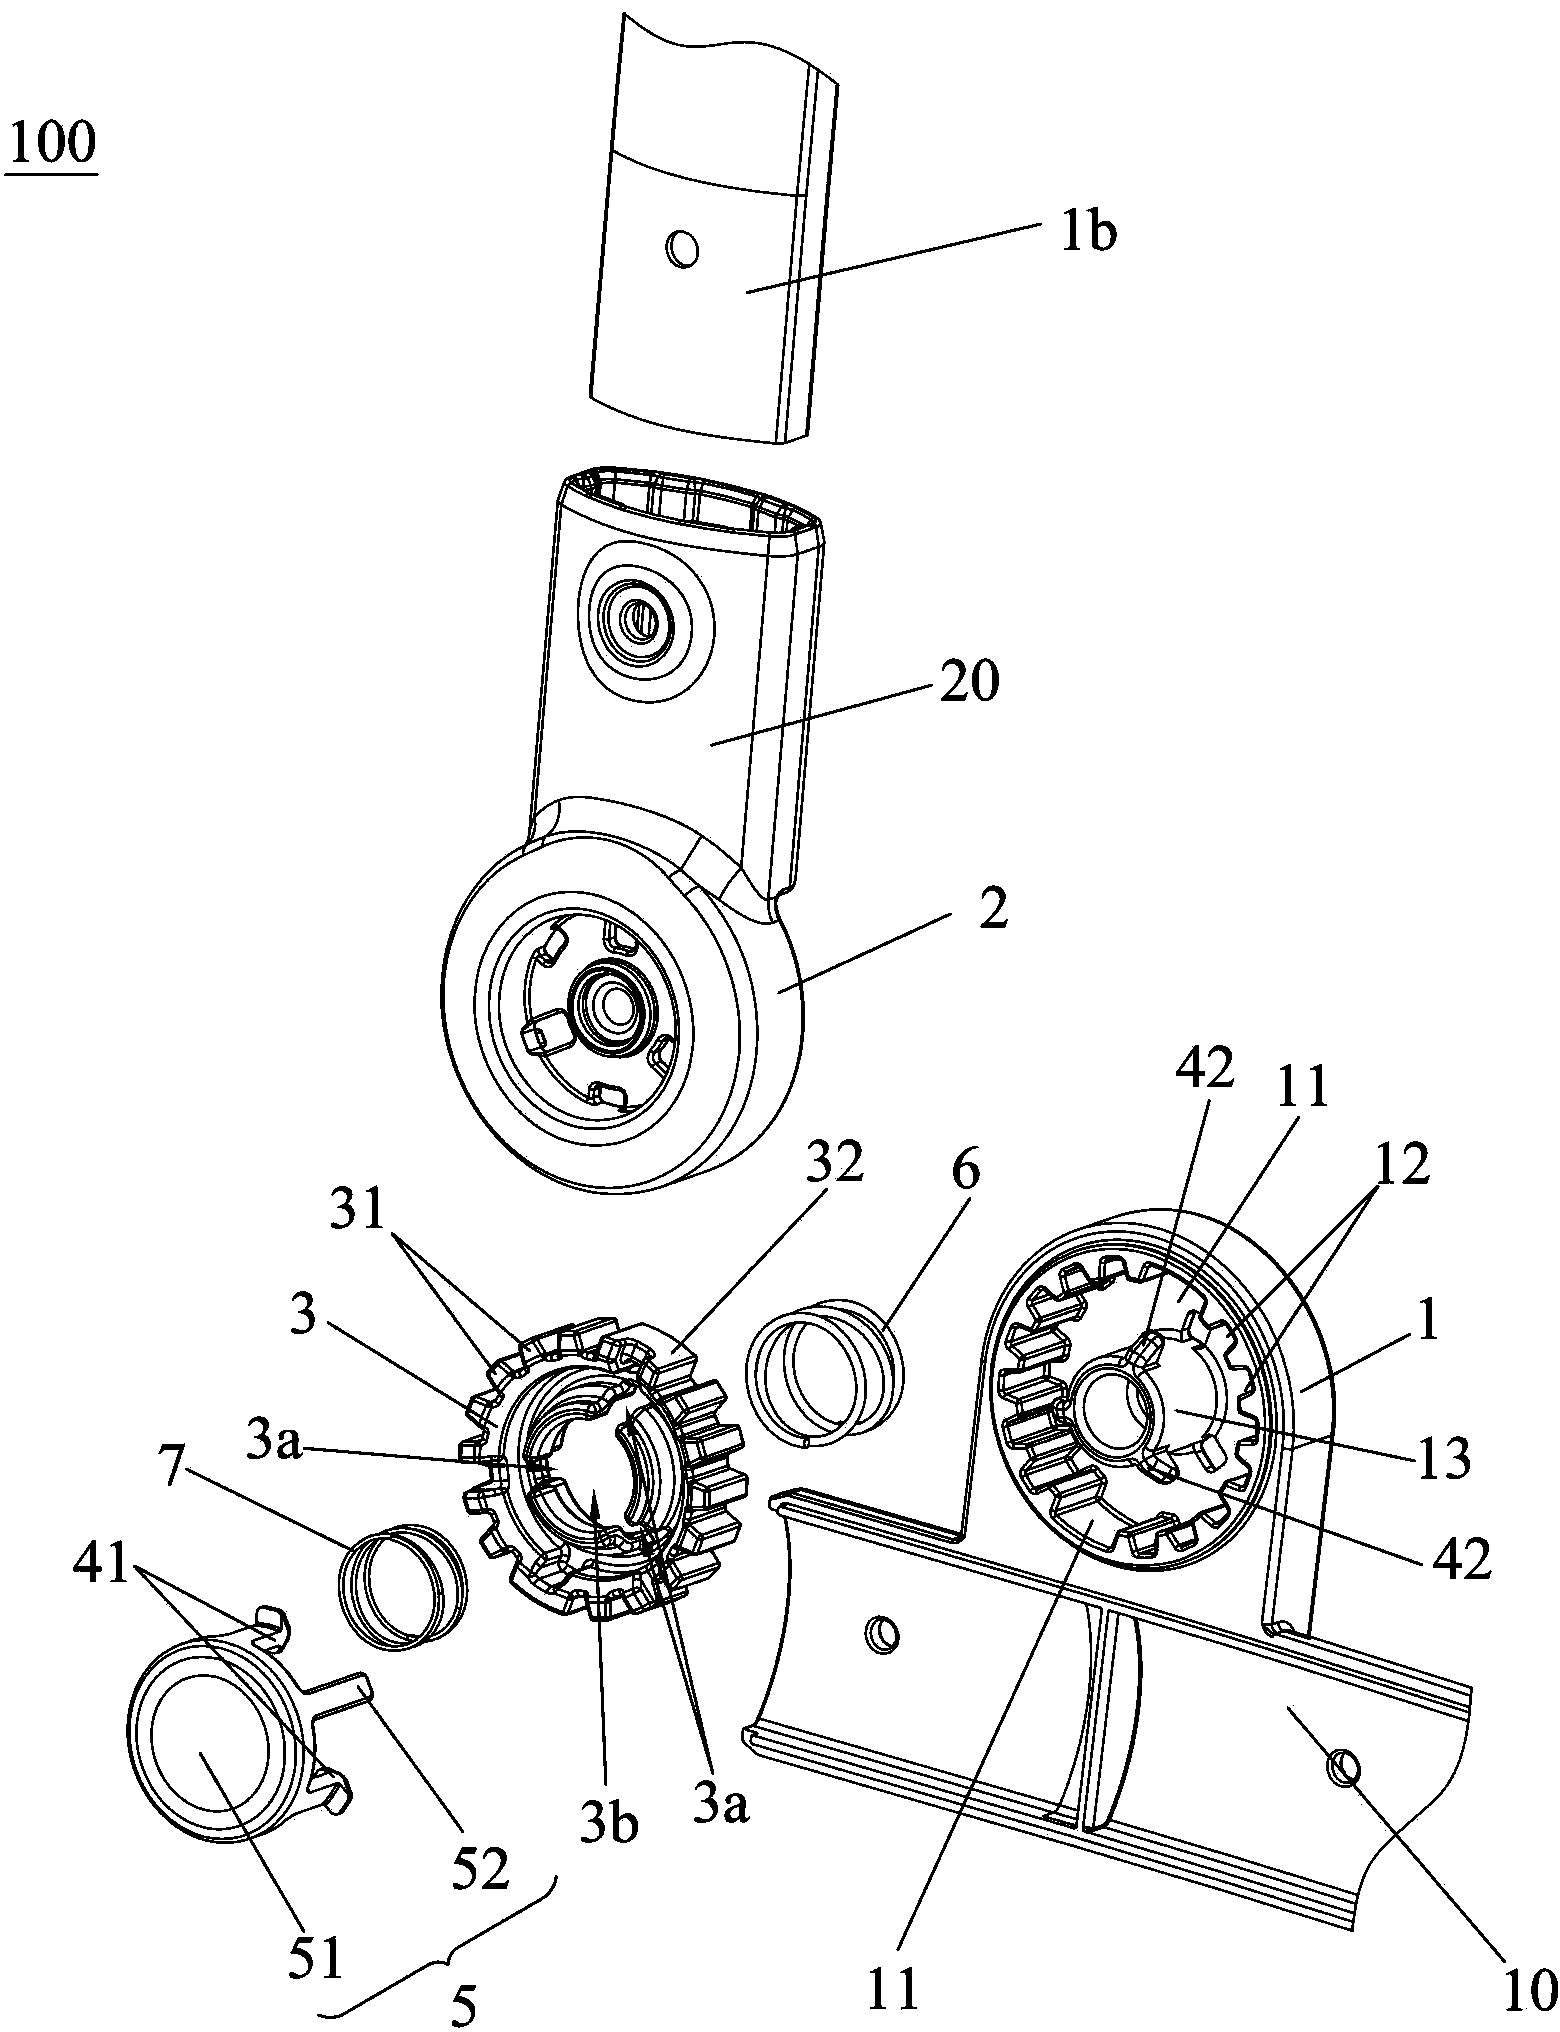 Joint device